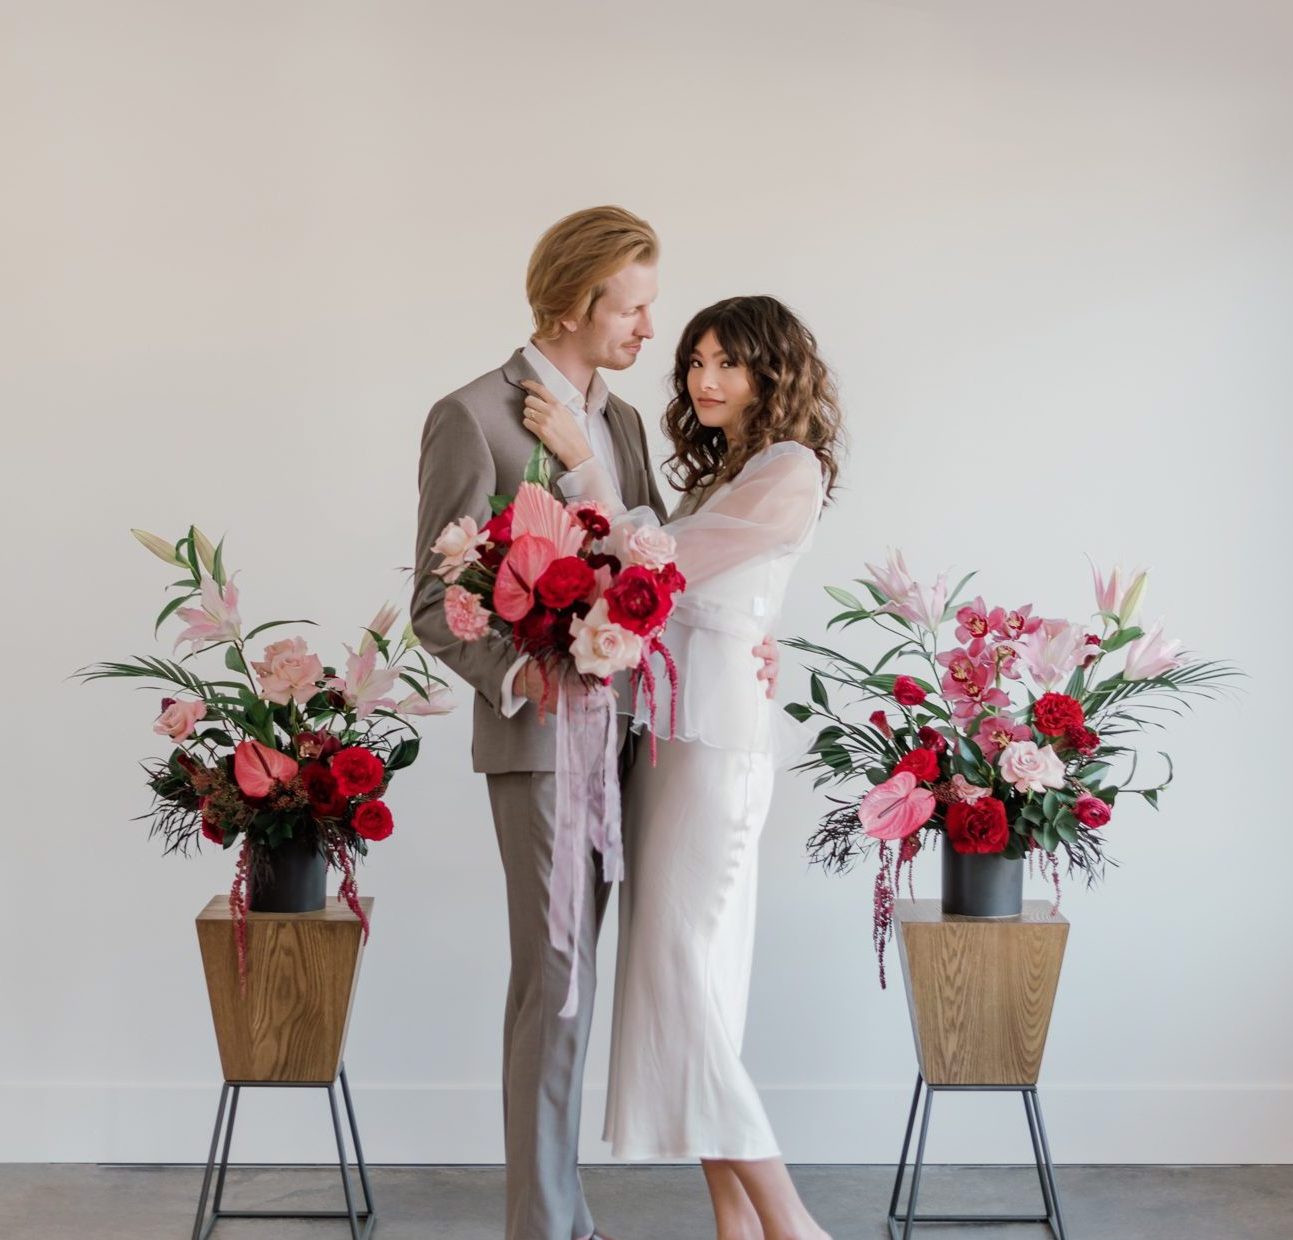 Delicious Pink and Berry Hues in this Modern and Fresh Microwedding Inspiration